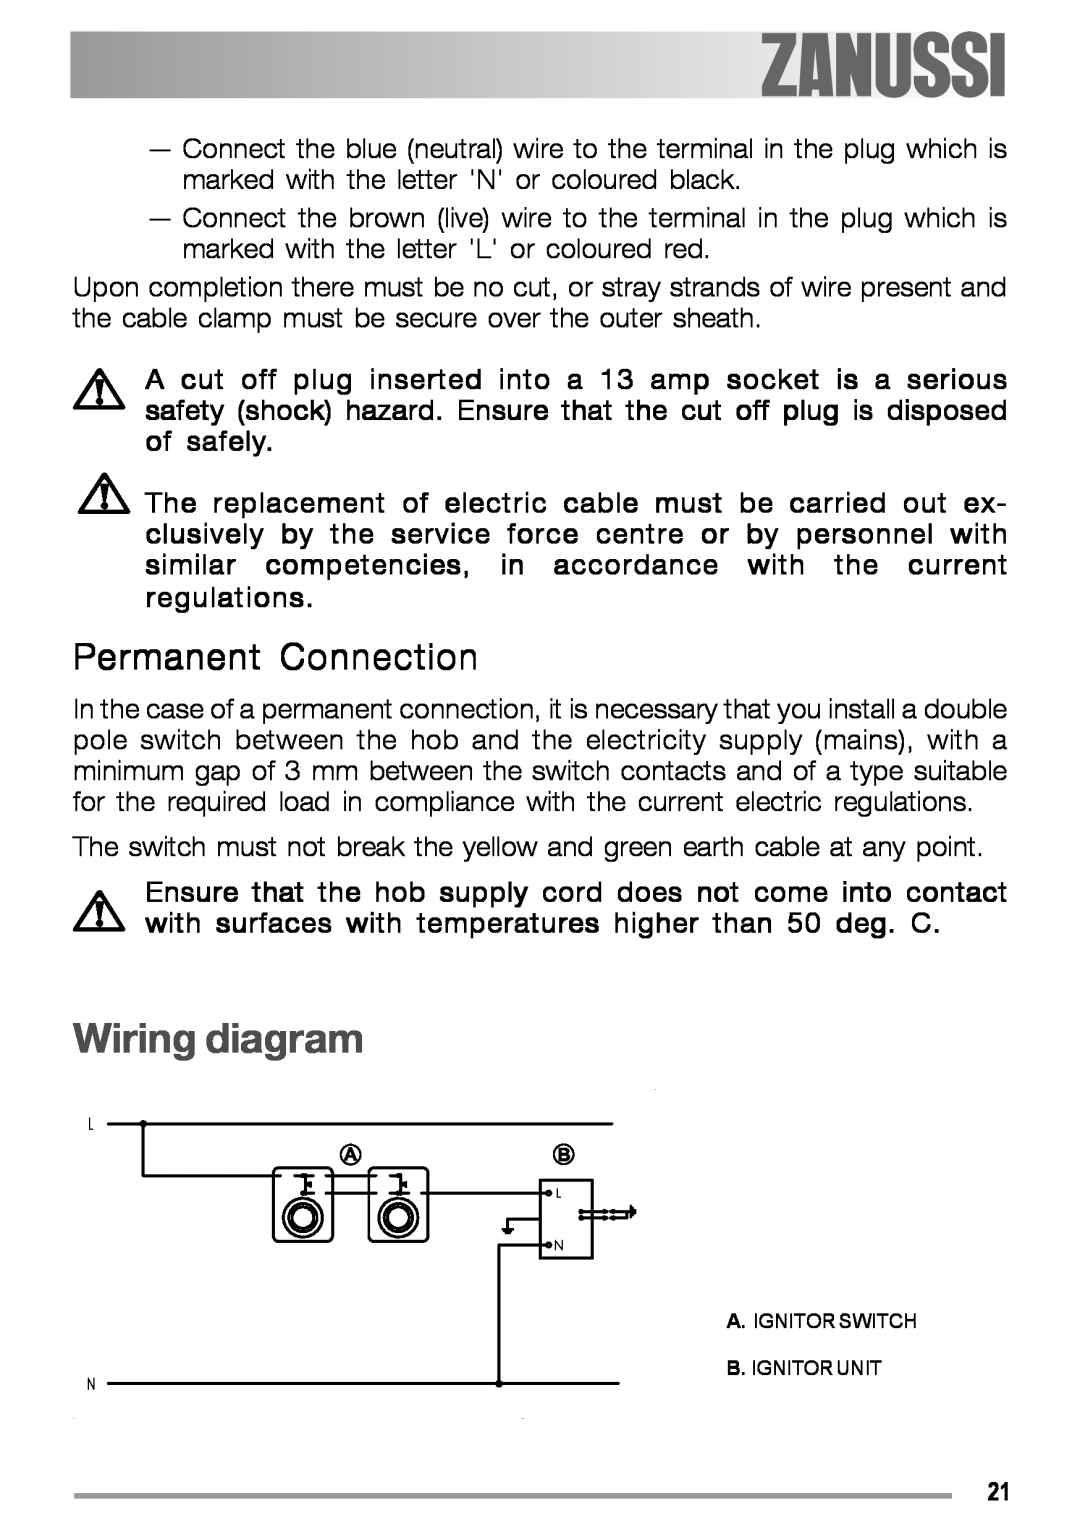 Zanussi ZGS 322 manual Wiring diagram, Permanent Connection 